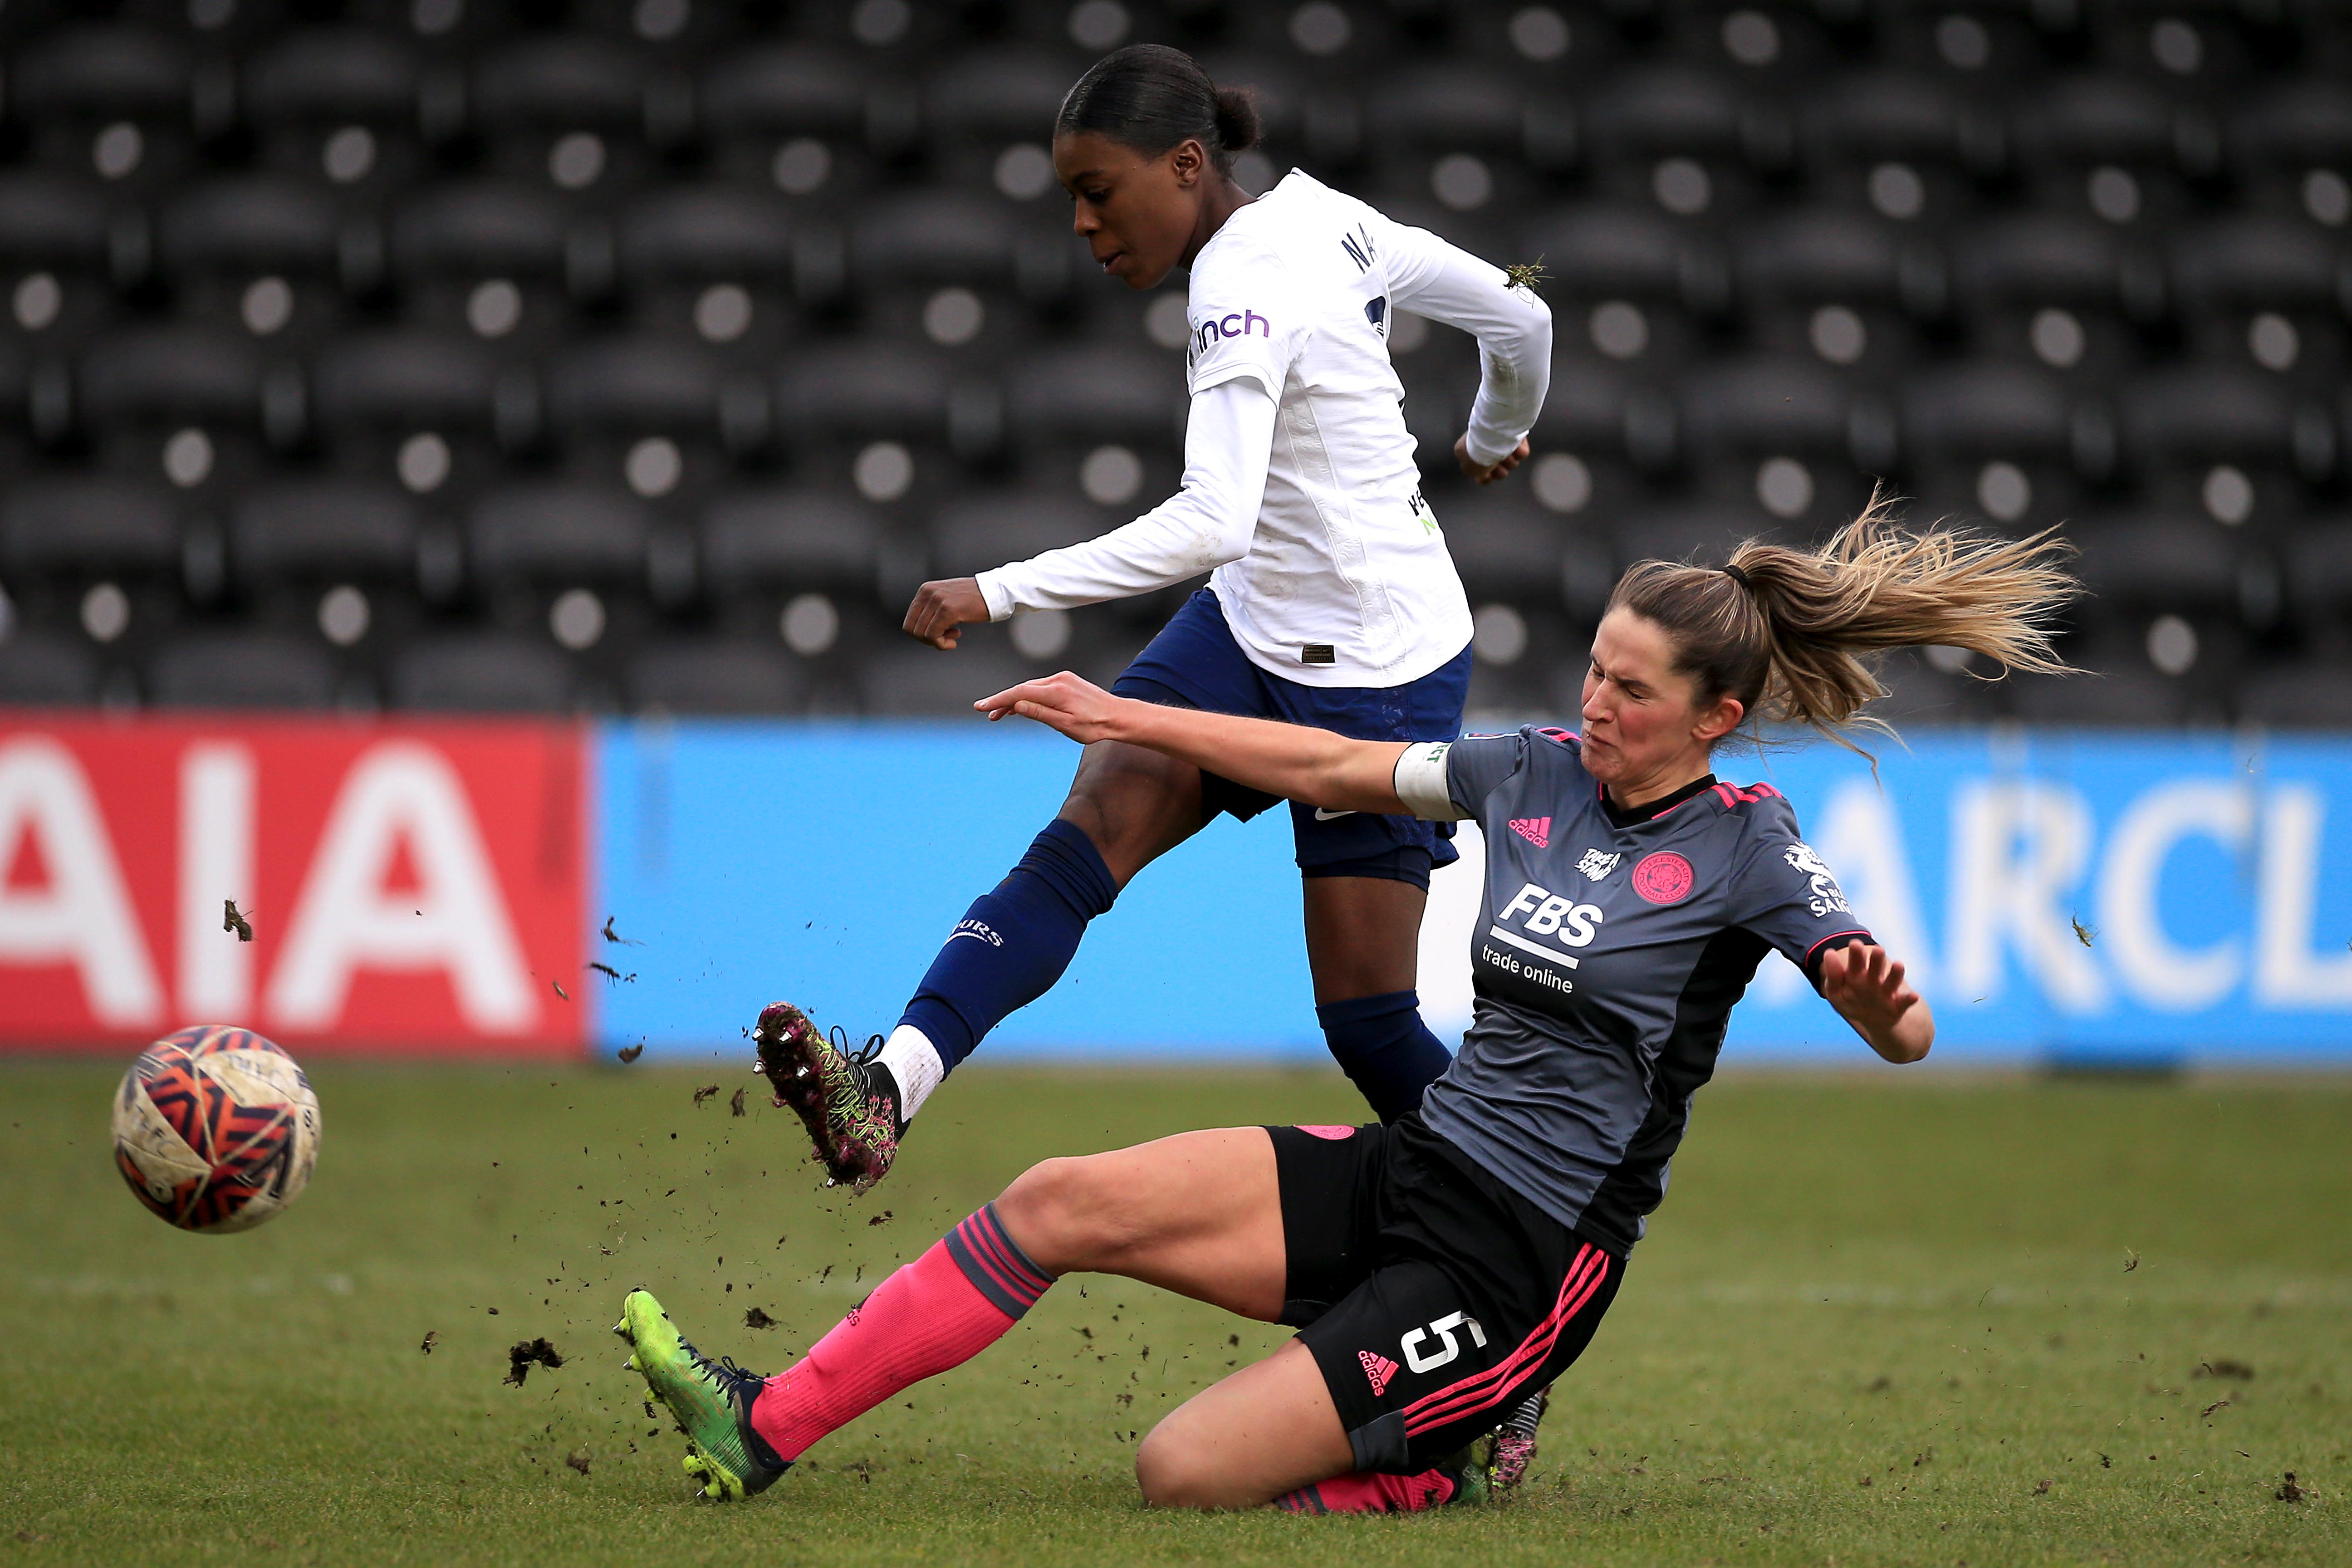 Tottenham Hotspur Women v Leicester City Women - Vitality Women’s FA Cup Fourth Round